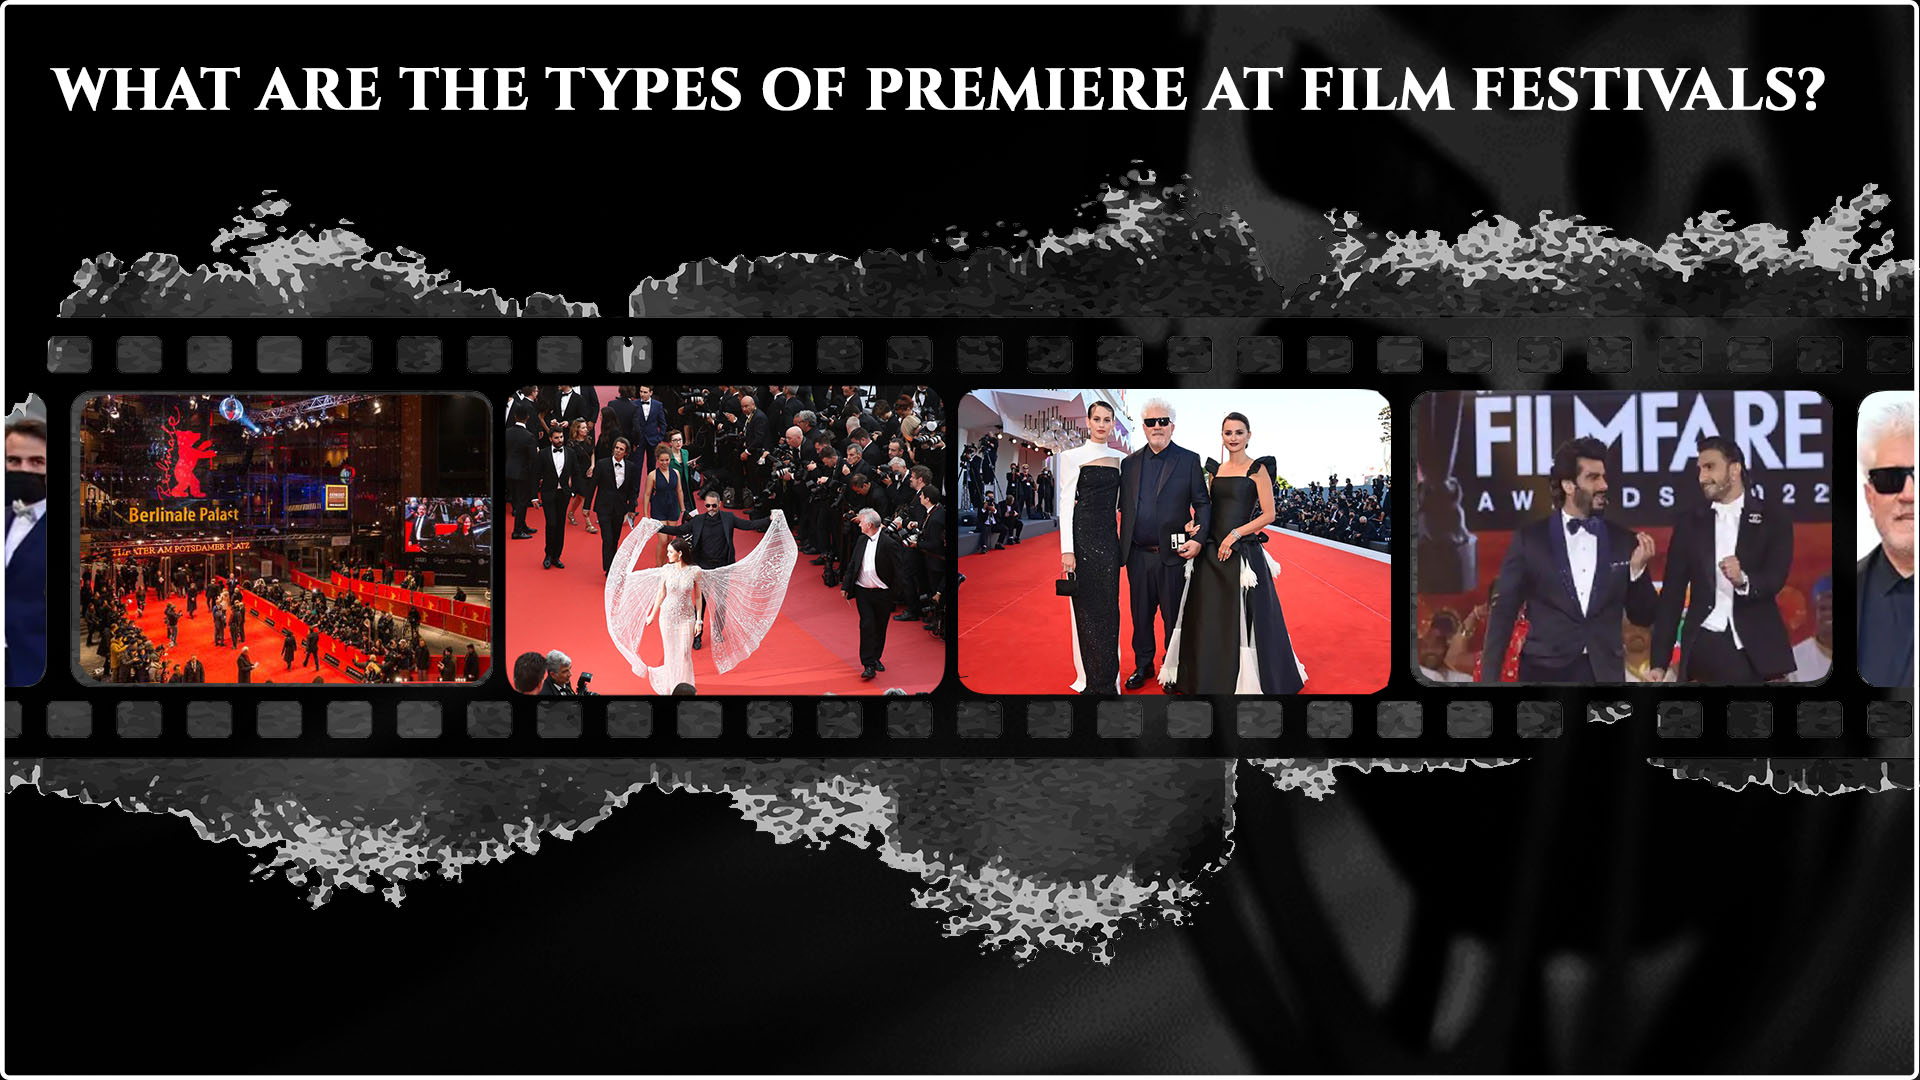 What are the types of premieres at film festivals?